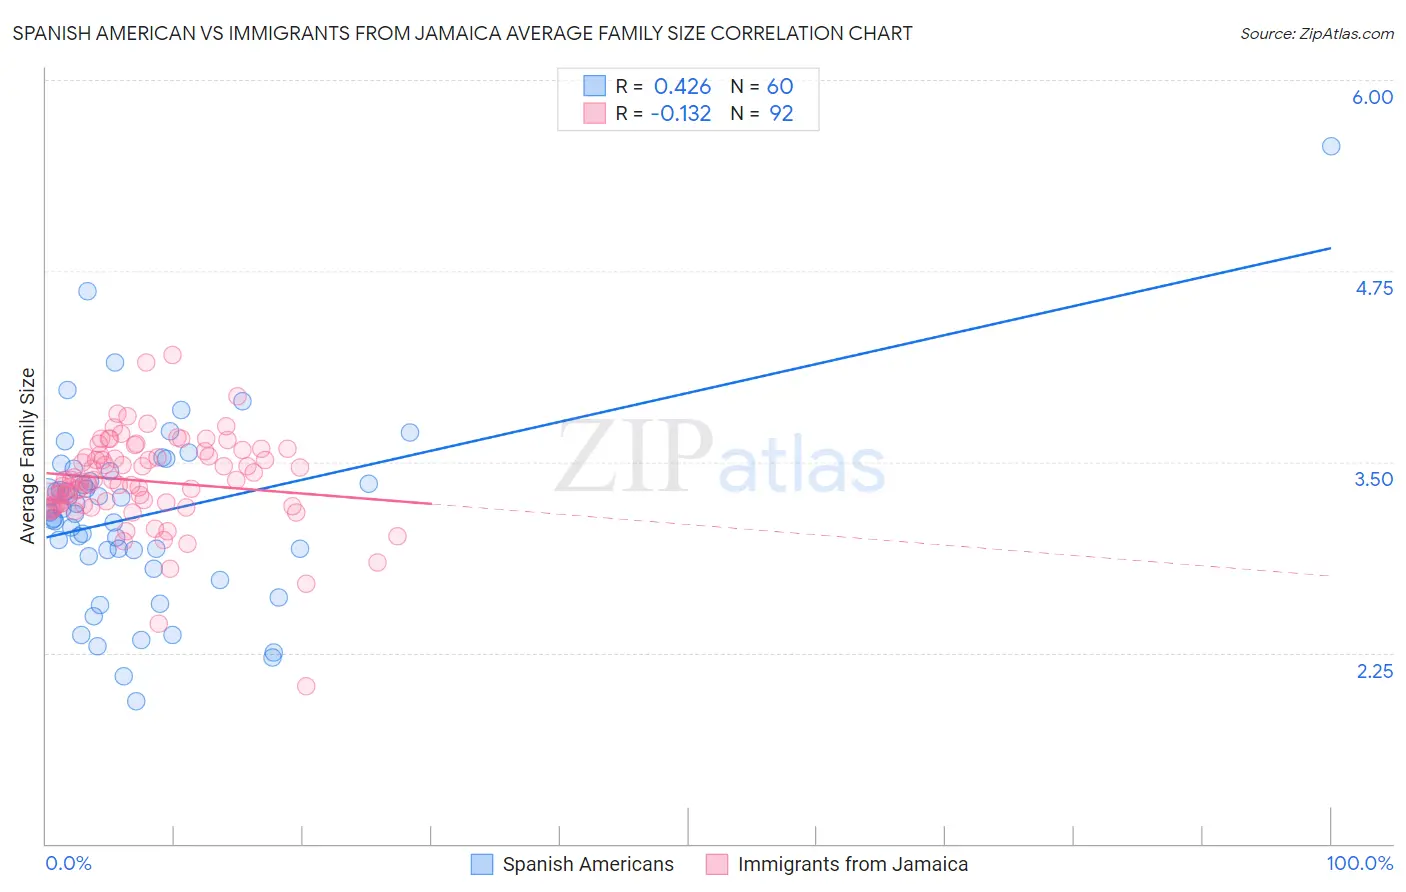 Spanish American vs Immigrants from Jamaica Average Family Size